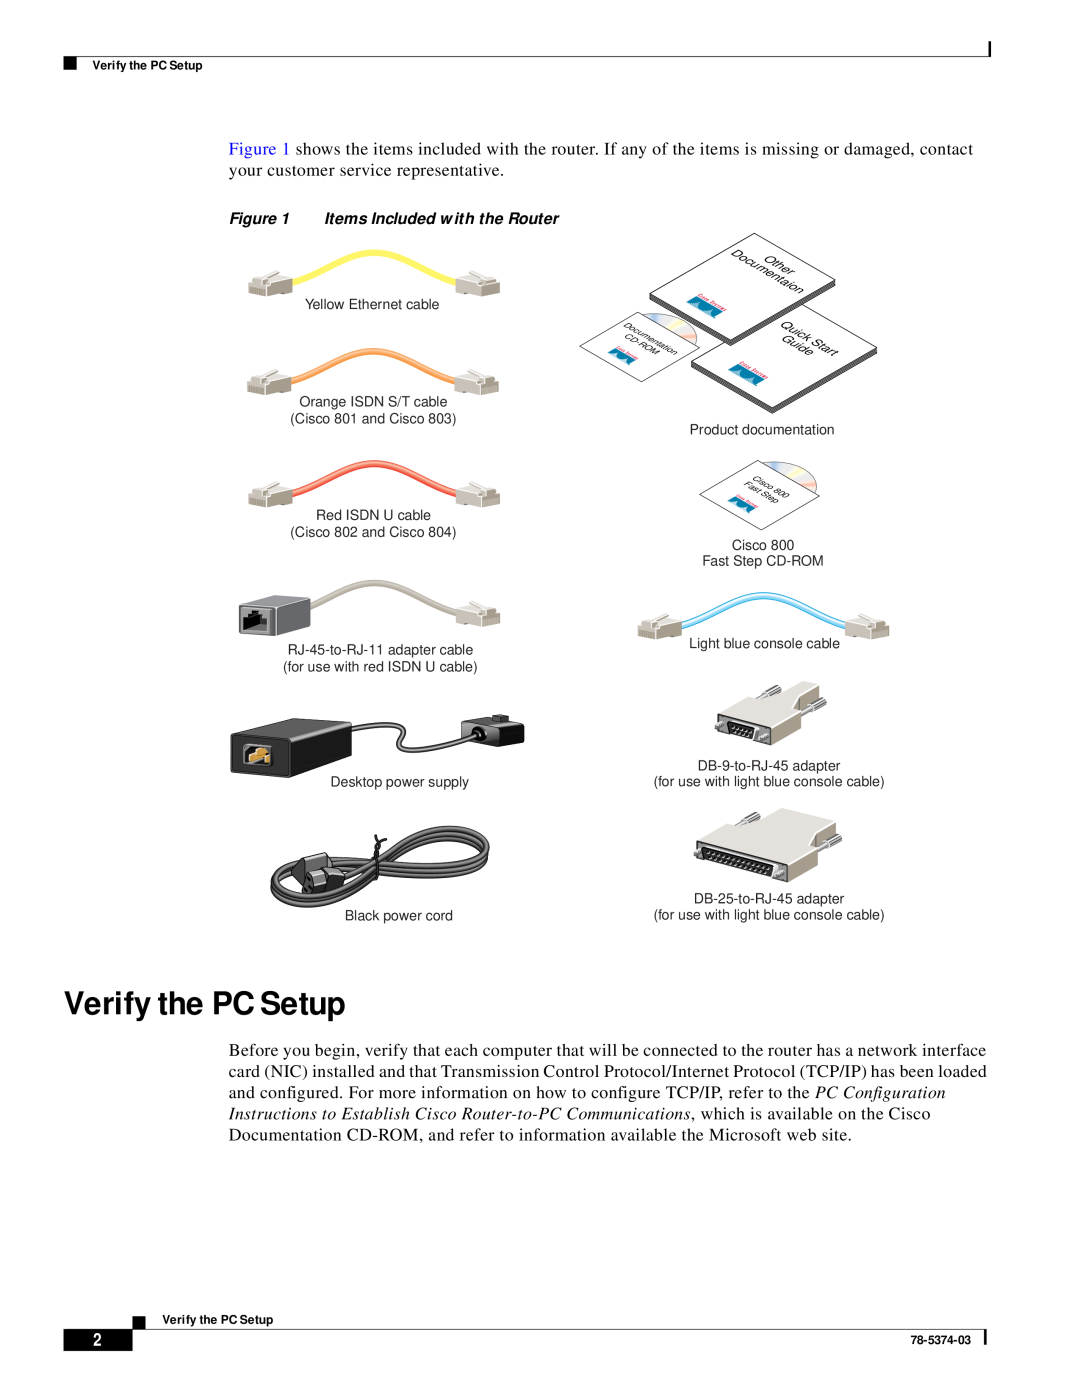 Cisco Systems 2800 Series quick start Verify the PC Setup, Items Included with the Router 